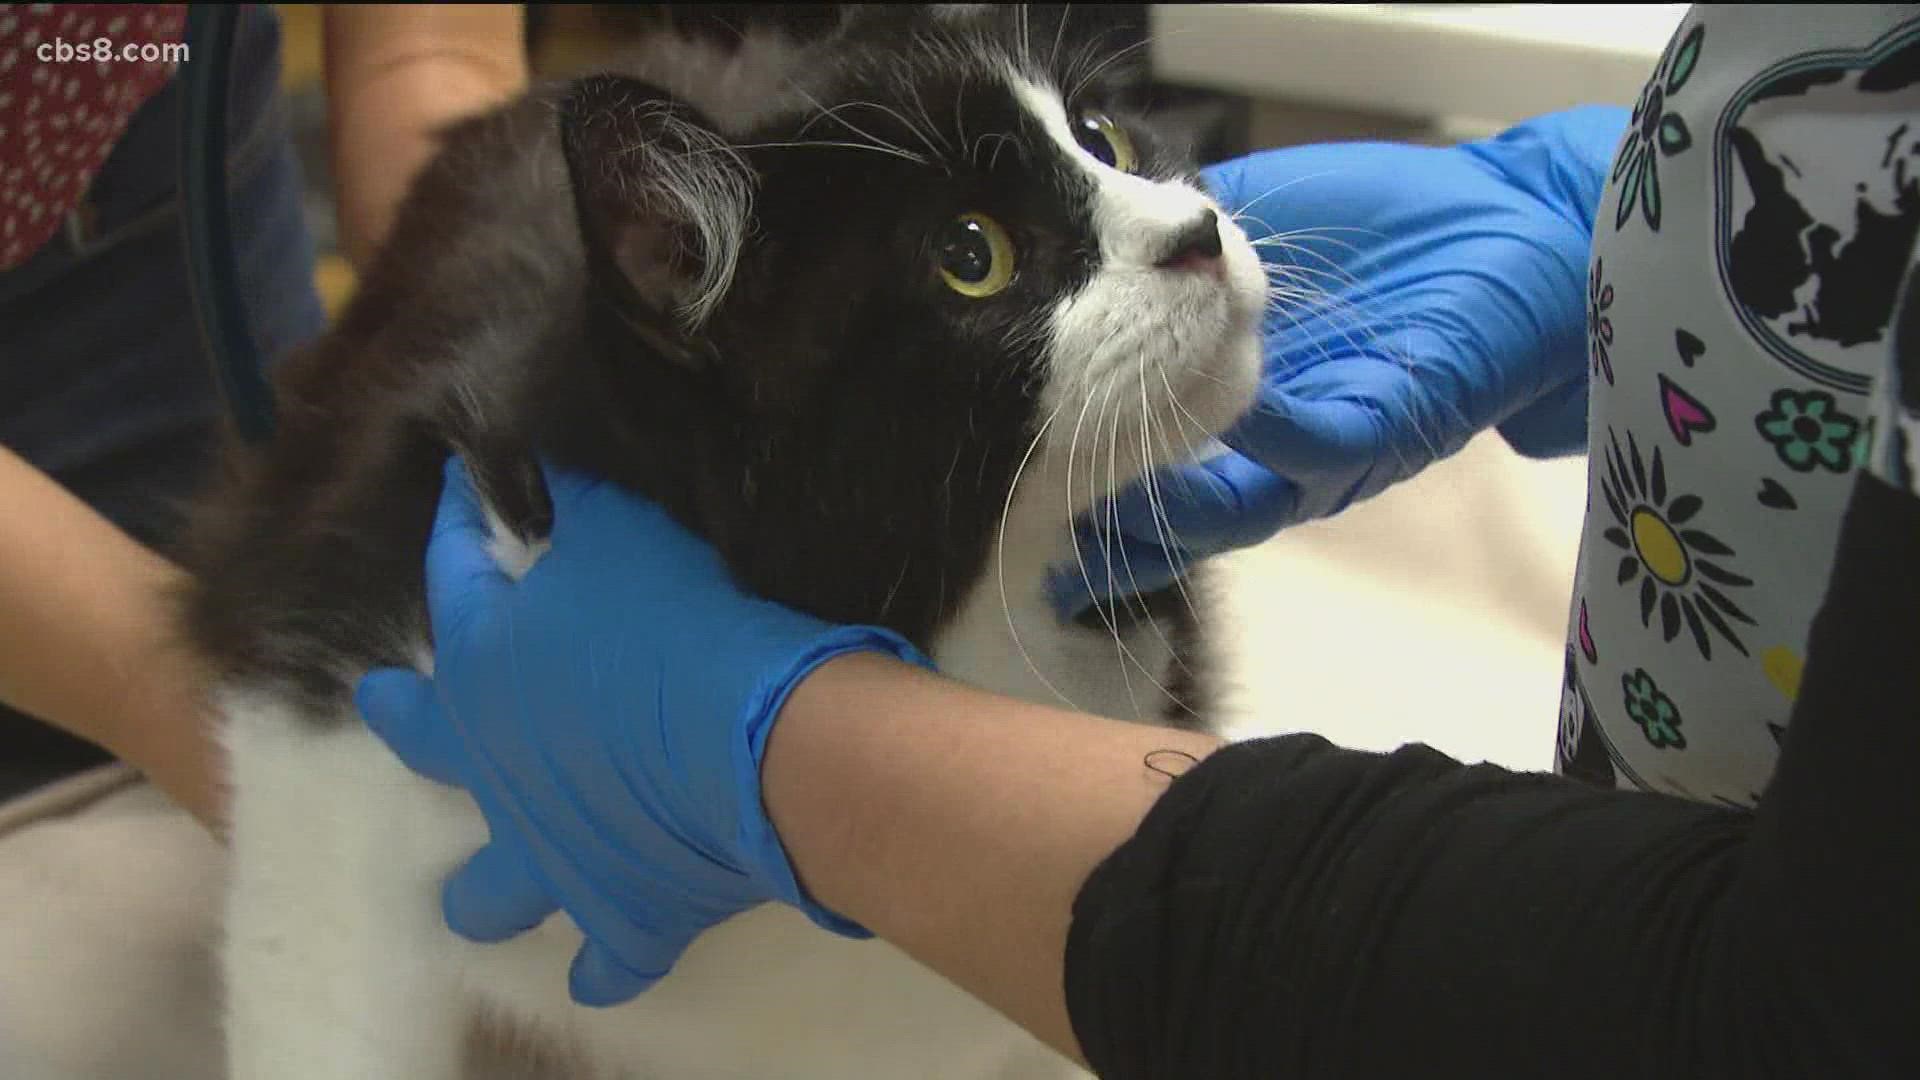 Local pet owners say it's becoming more and more difficult to make veterinarian appointments.